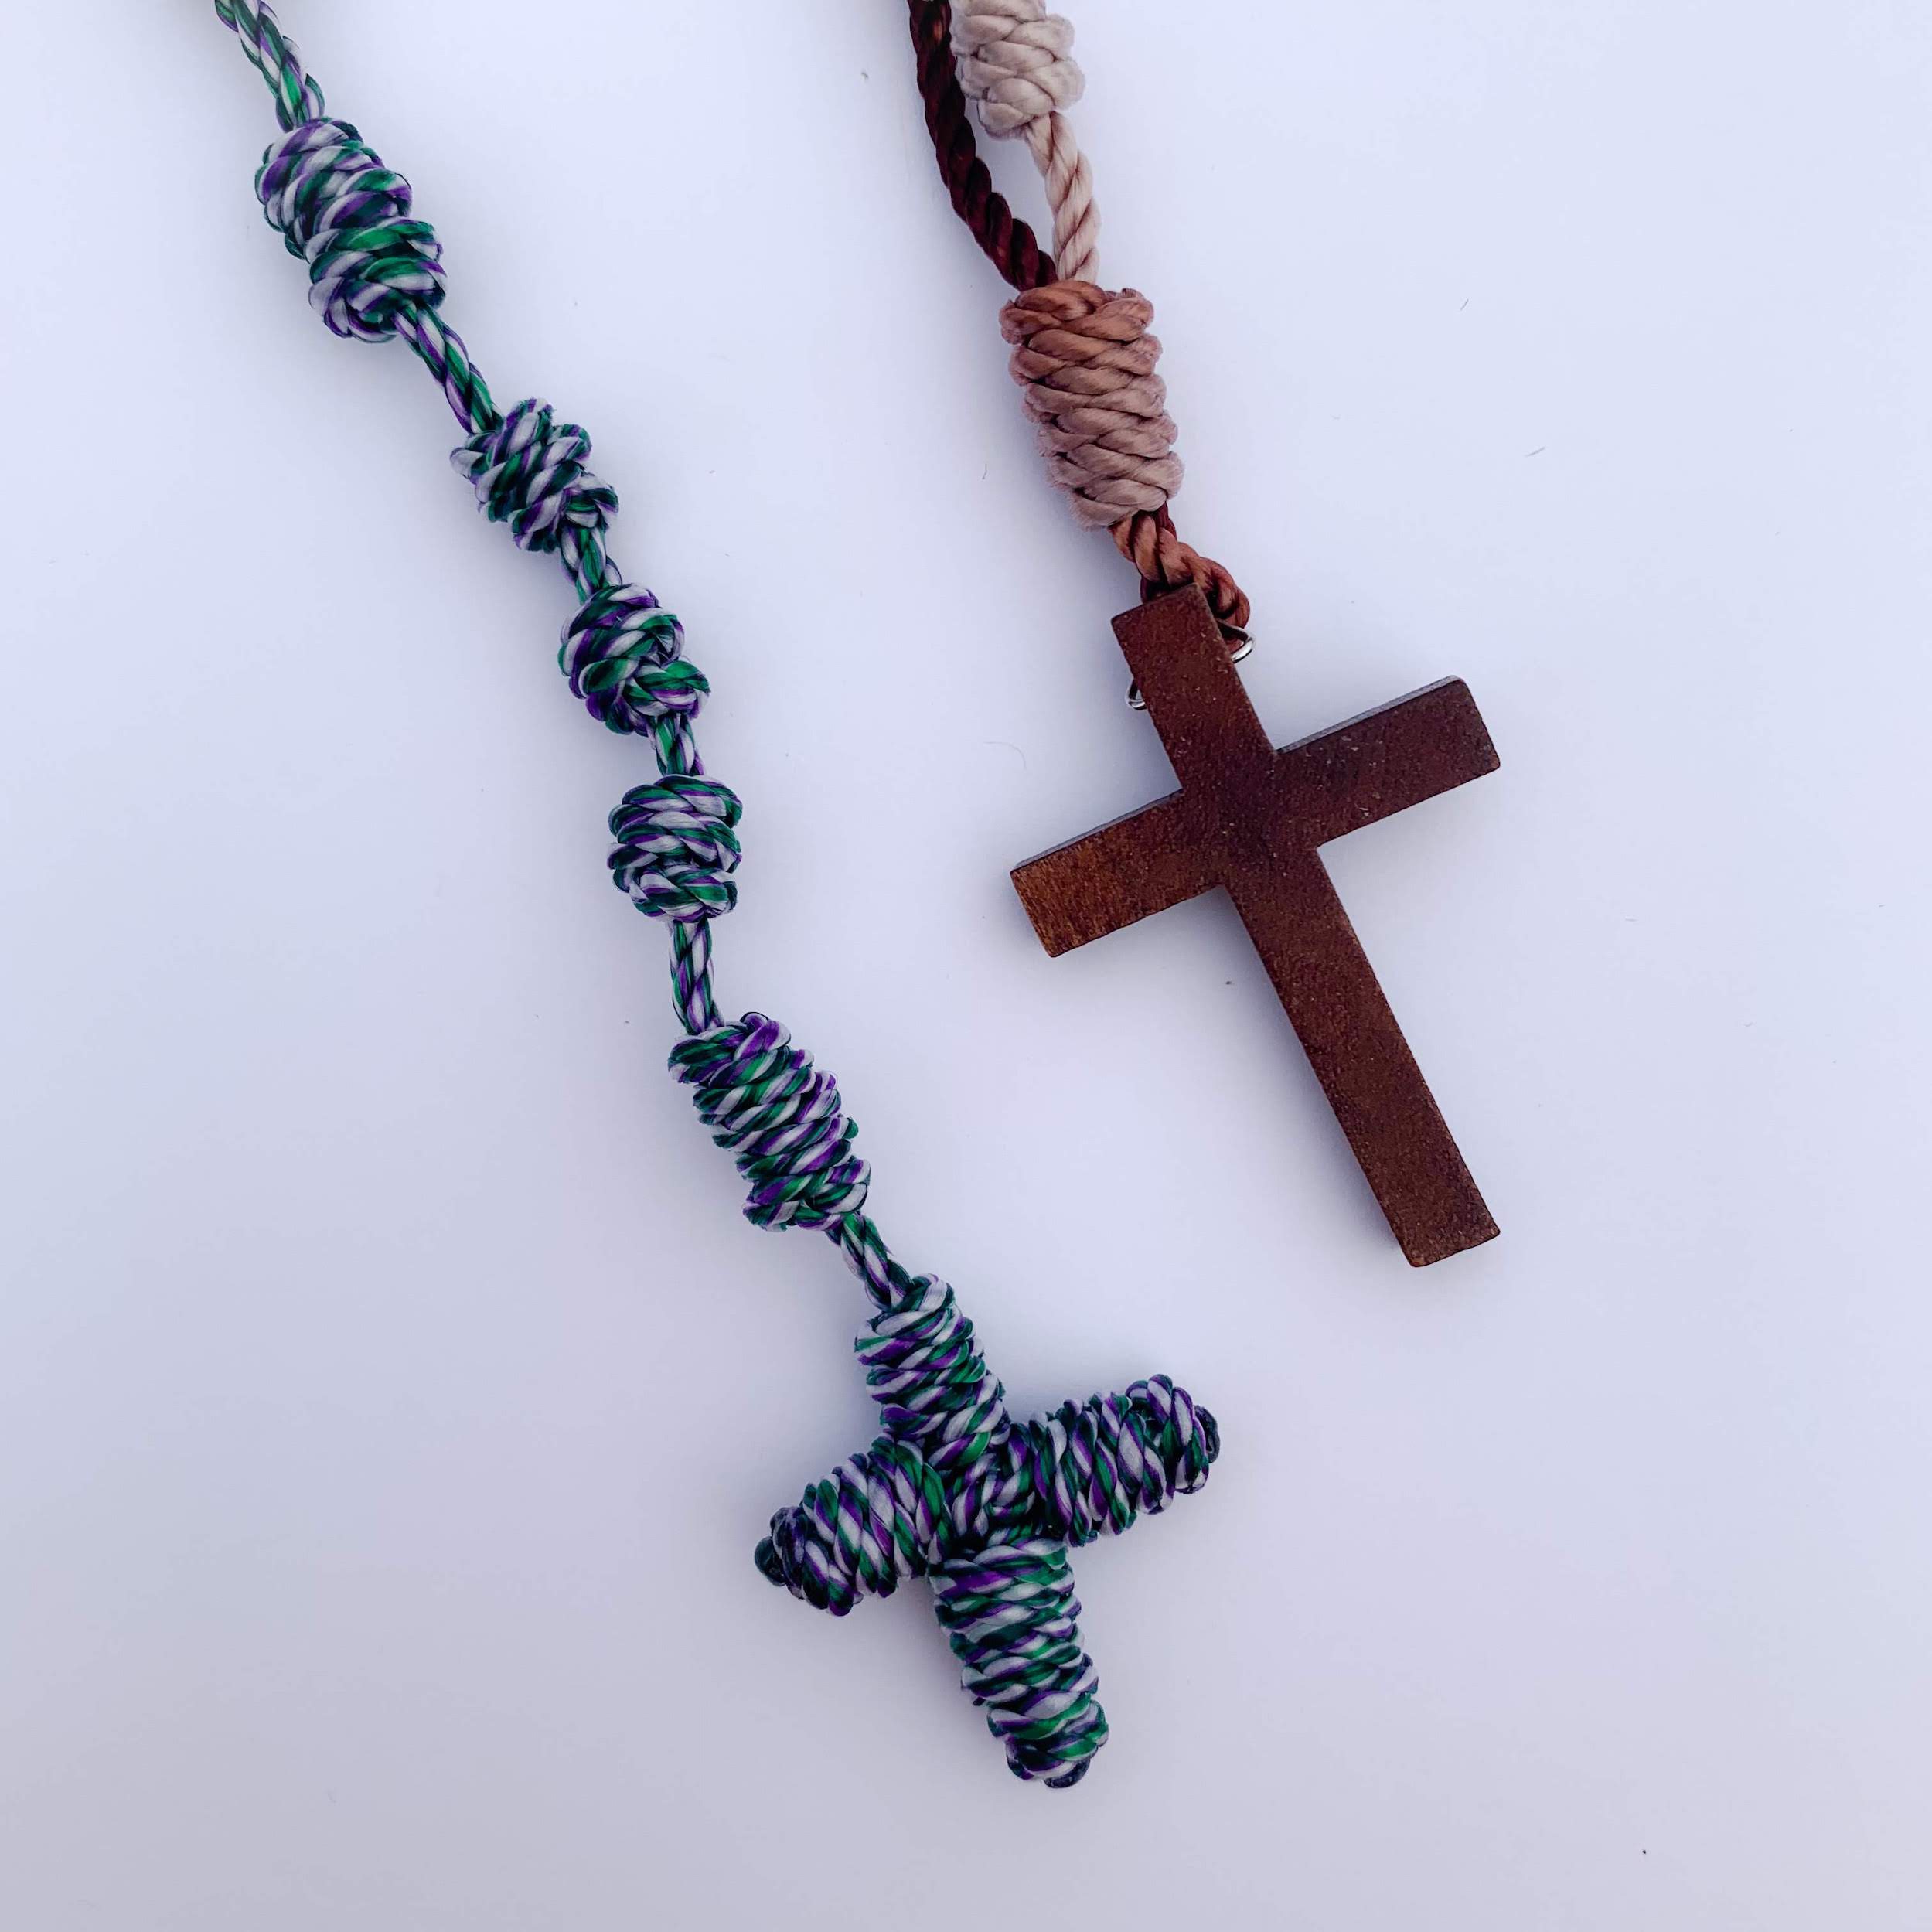 Knotted Rosaries